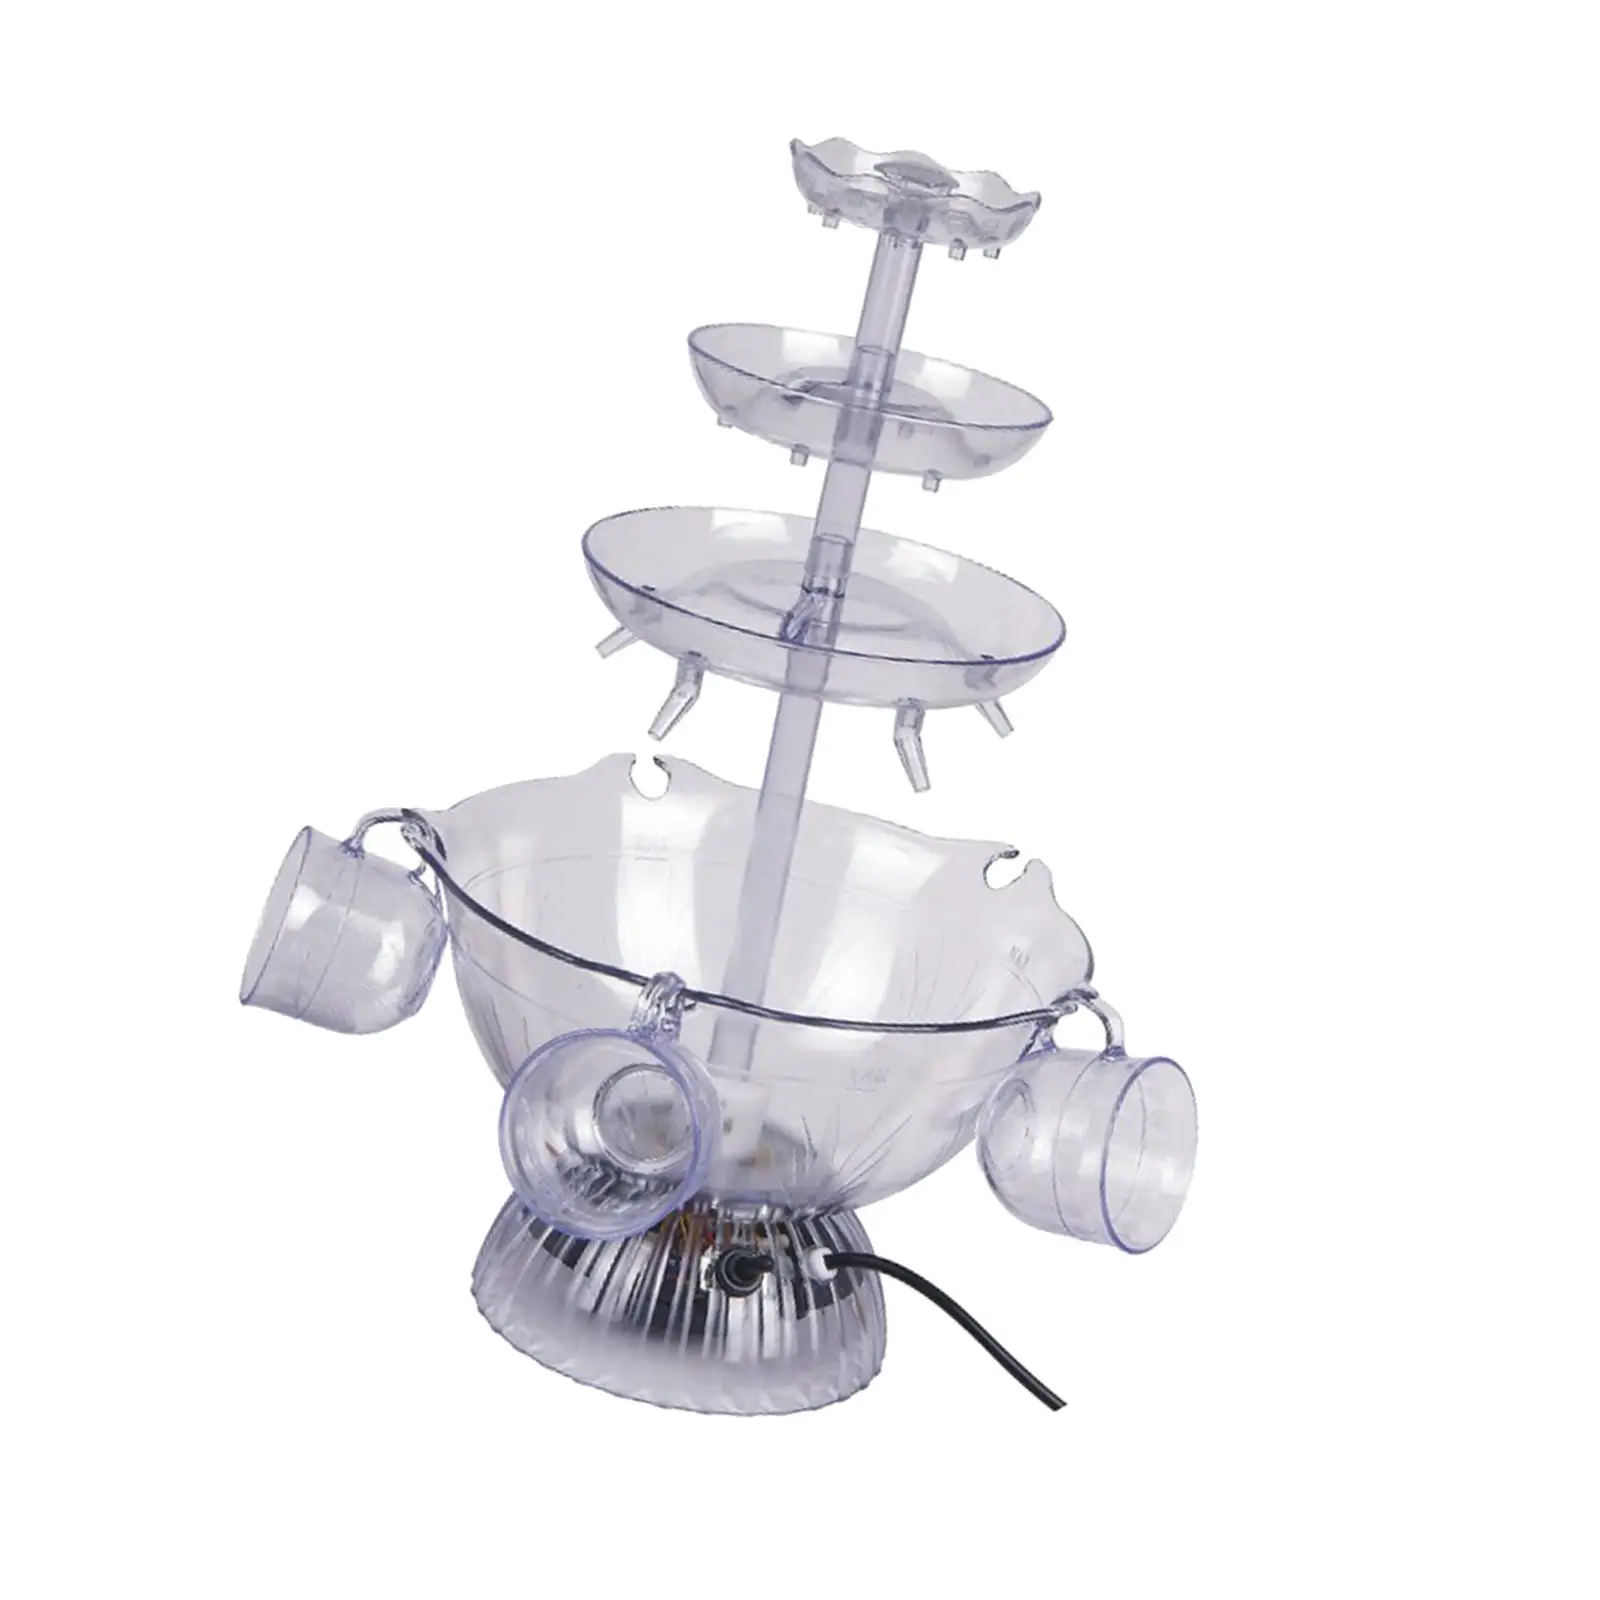 3 Tier Party Fountain DIY Waterfall Durable Multifunction Portable for